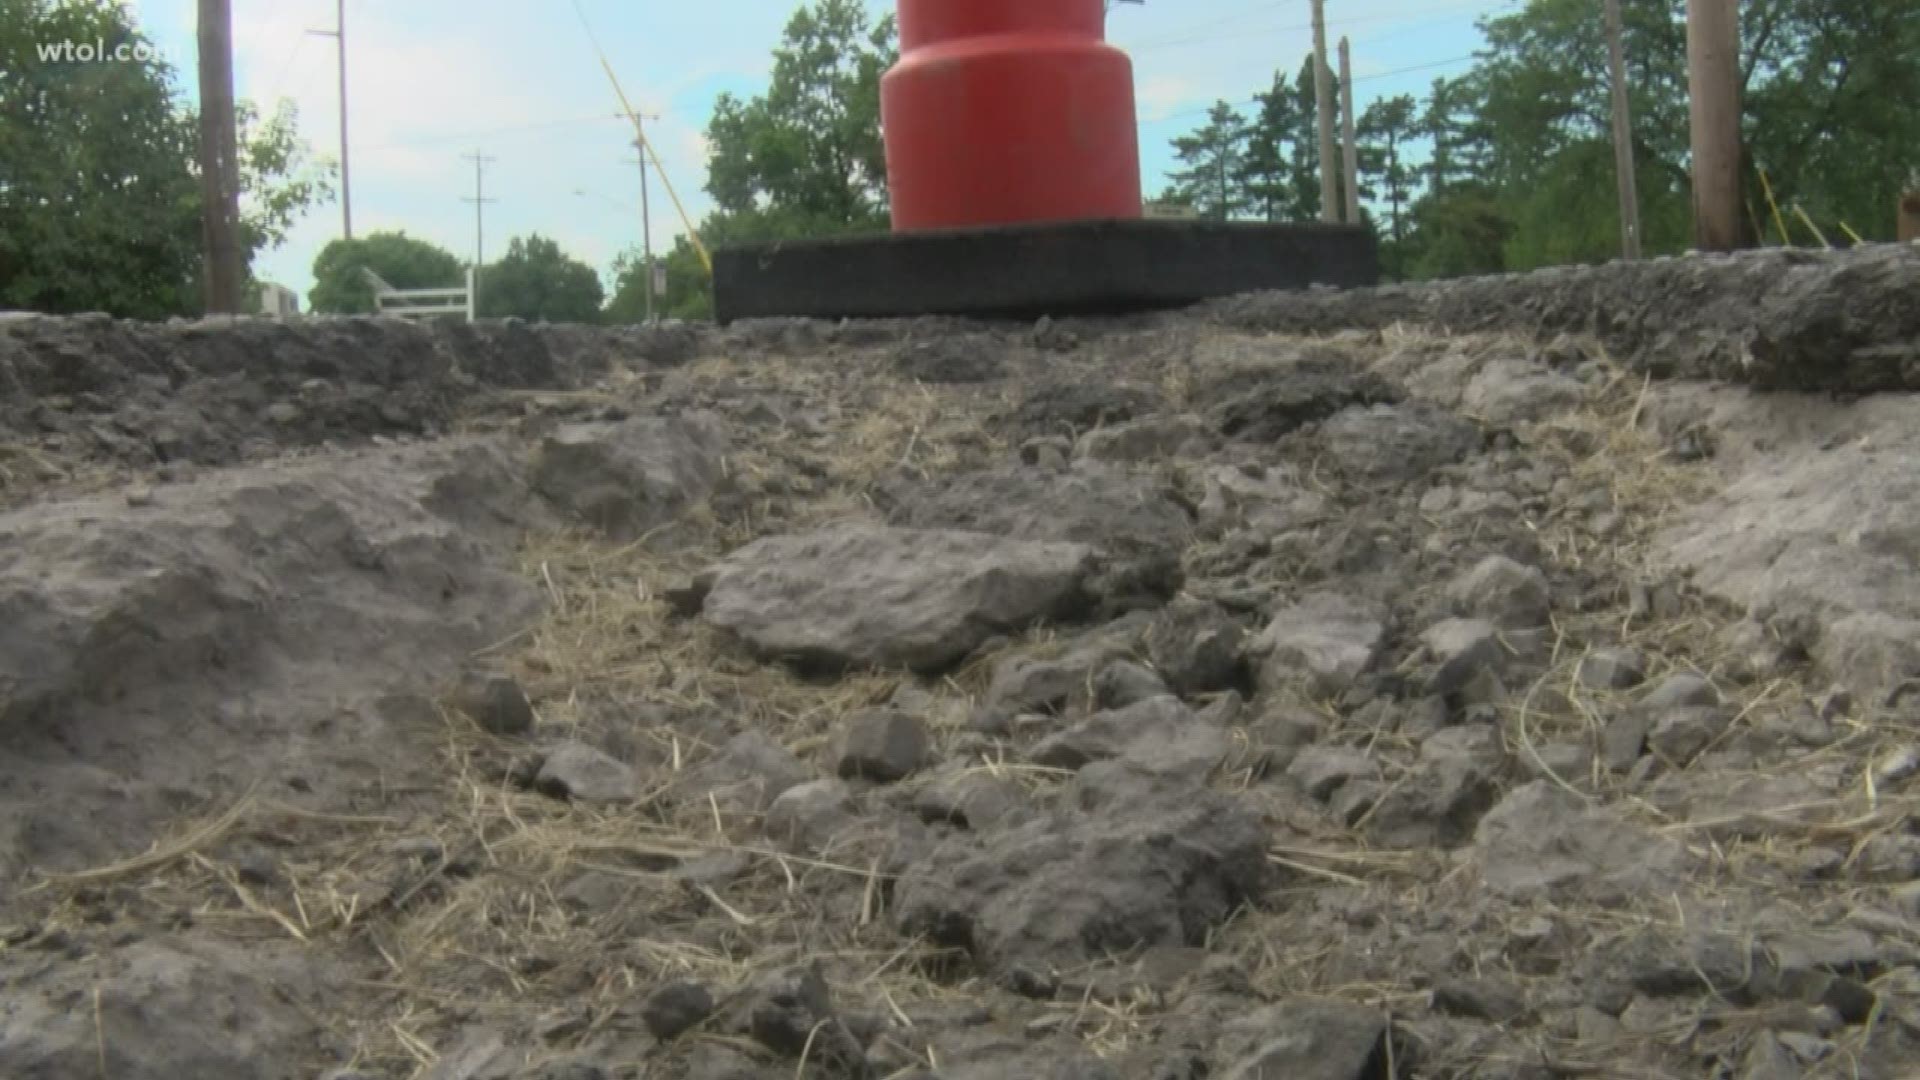 The councilman complained Monday that the roads full of potholes in south Toledo are hurting property values.